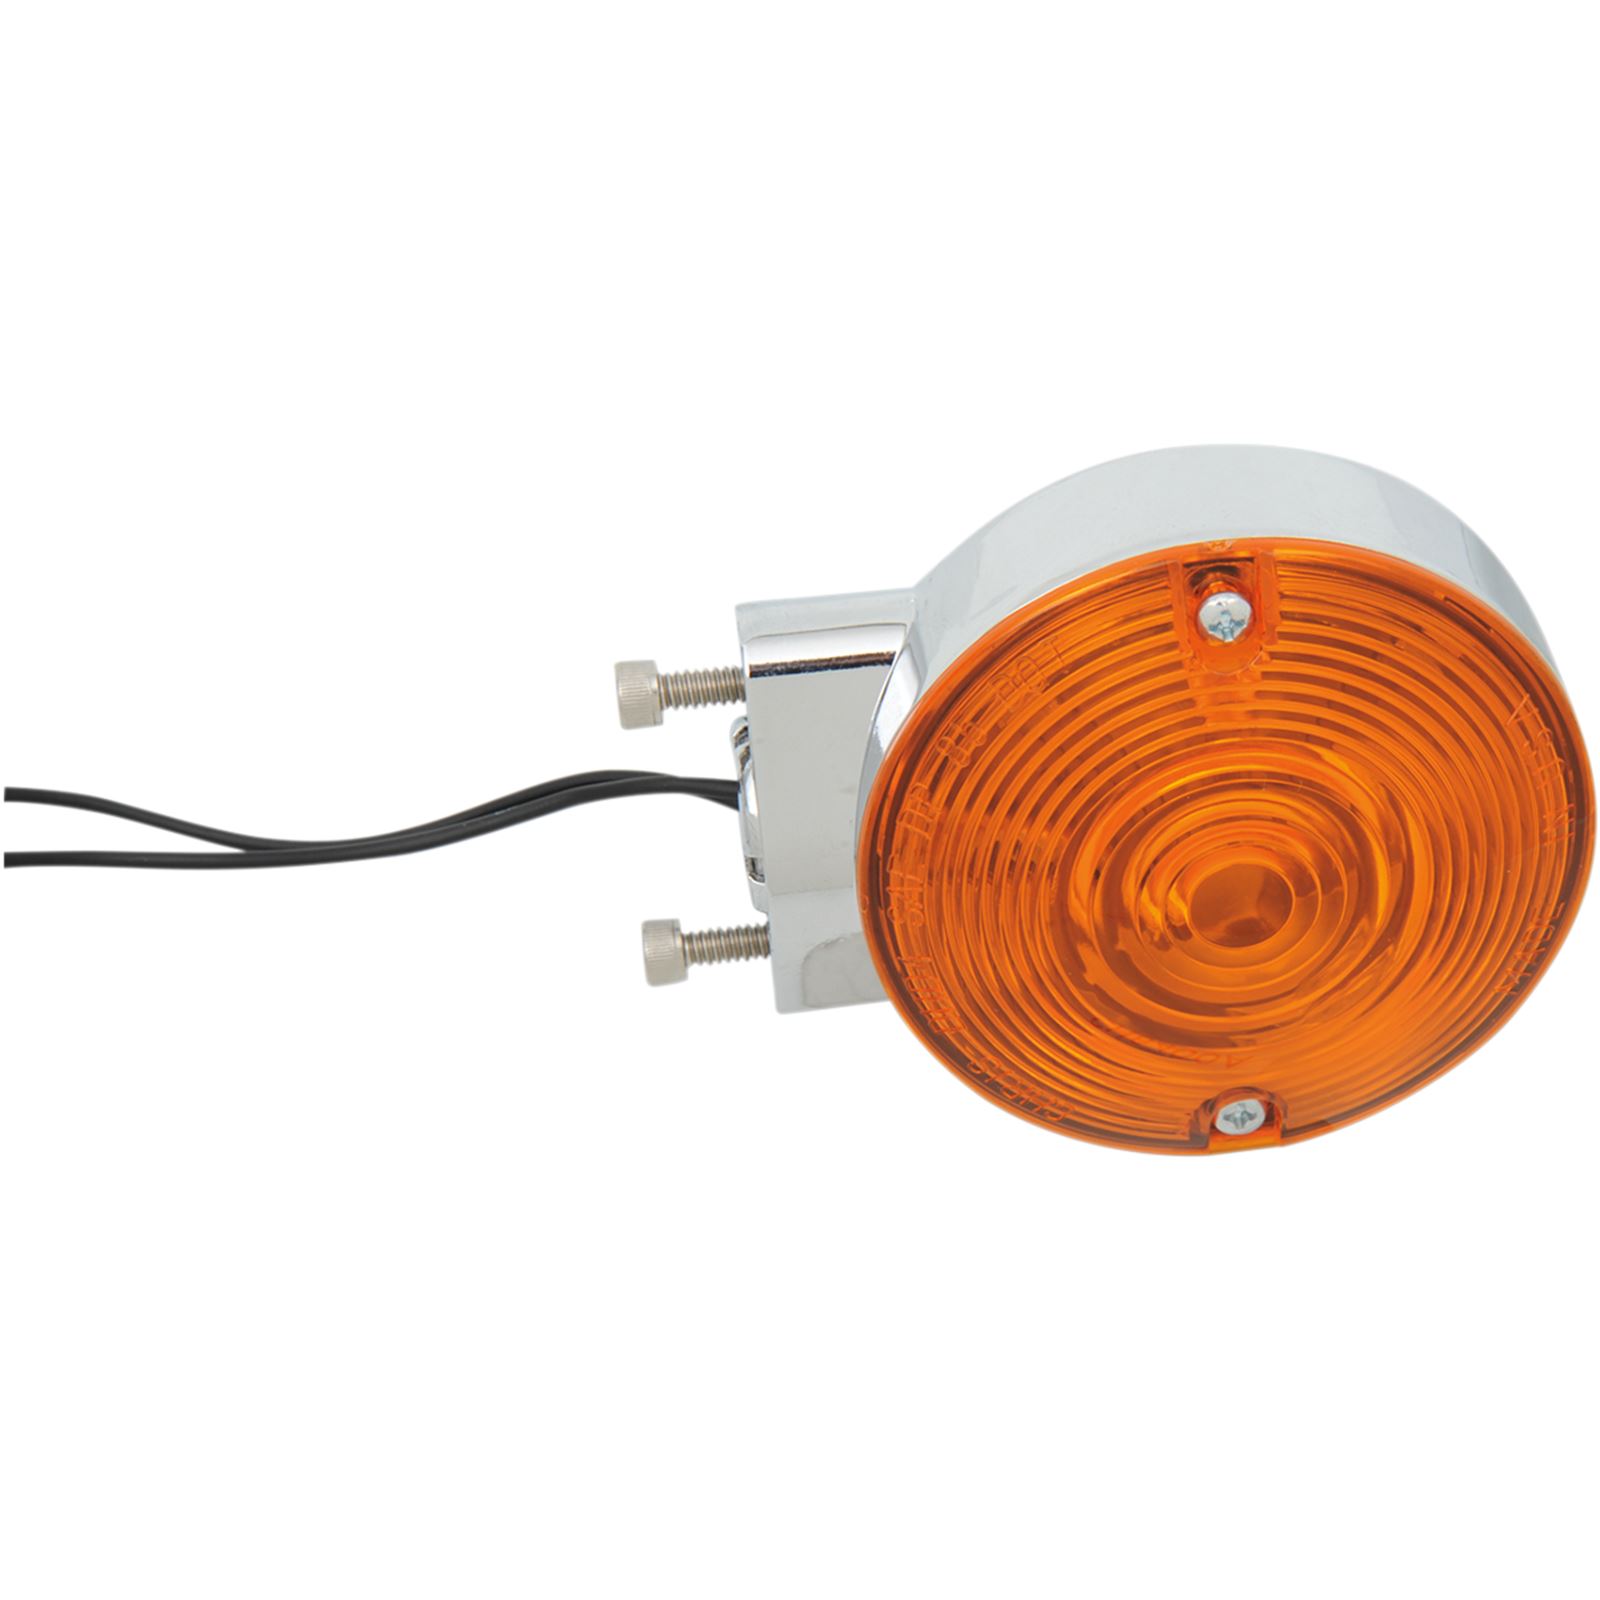 Chris Products Turn Signal - Single Filament - Amber